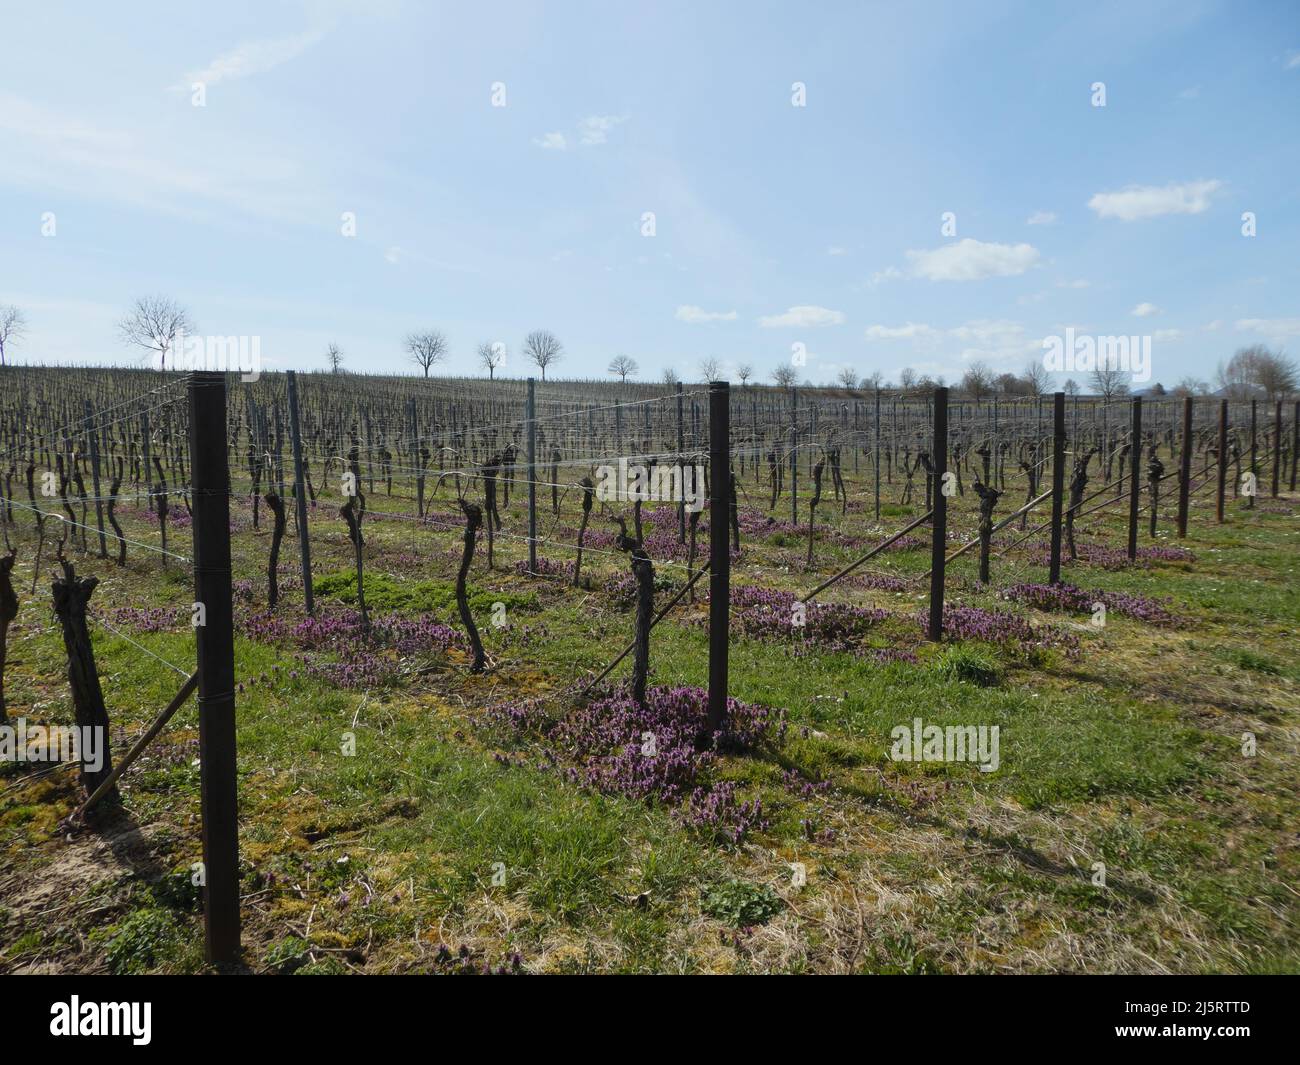 The lines of vine yards in springtime Stock Photo